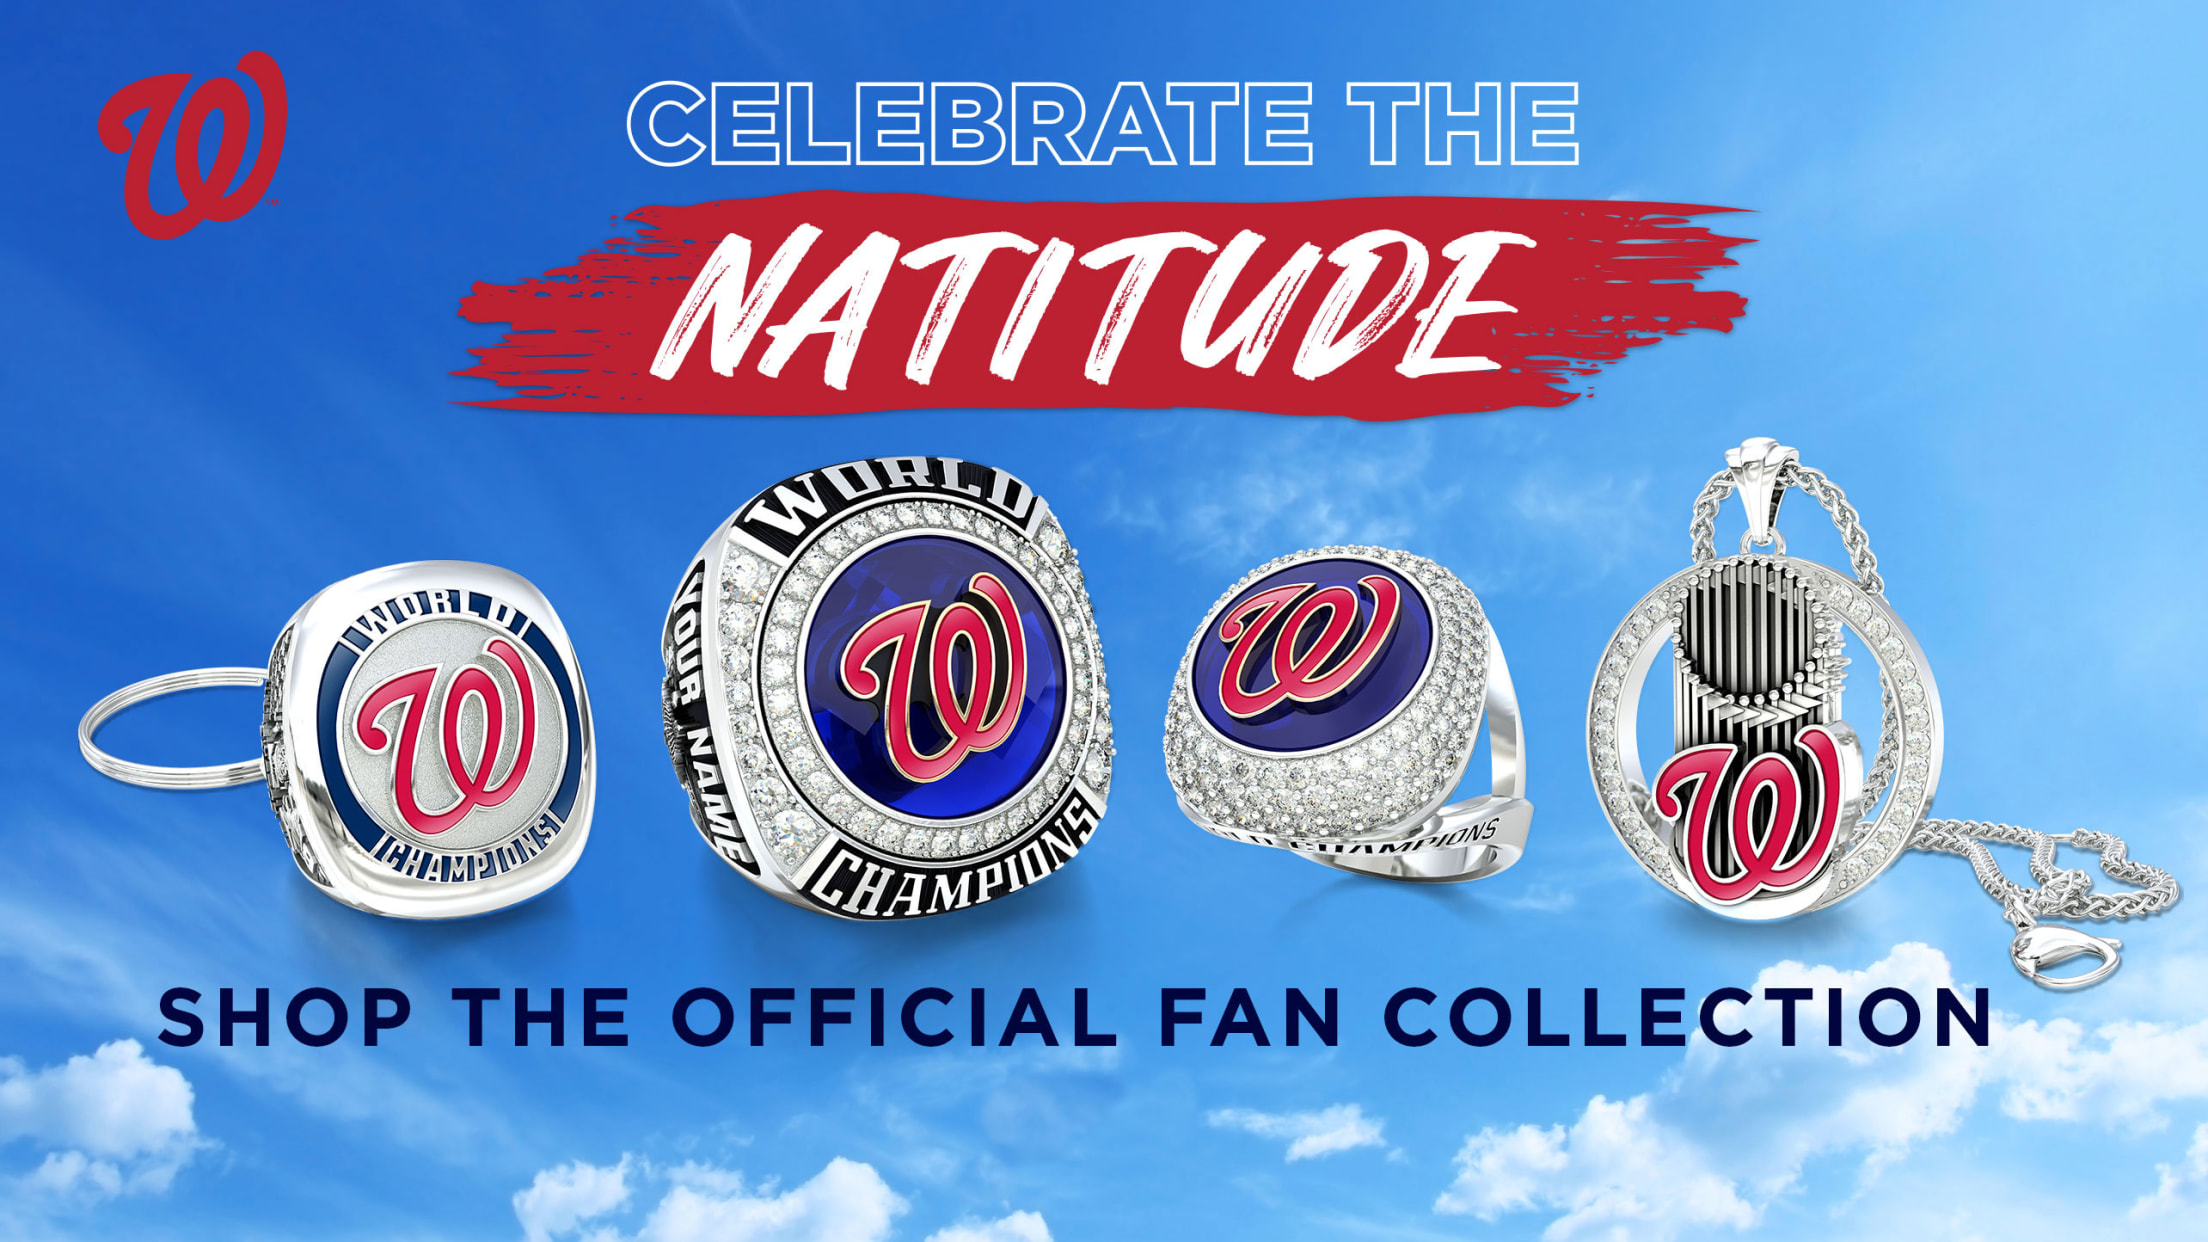 Nationals Team Store (@natsteamstore) • Instagram photos and videos